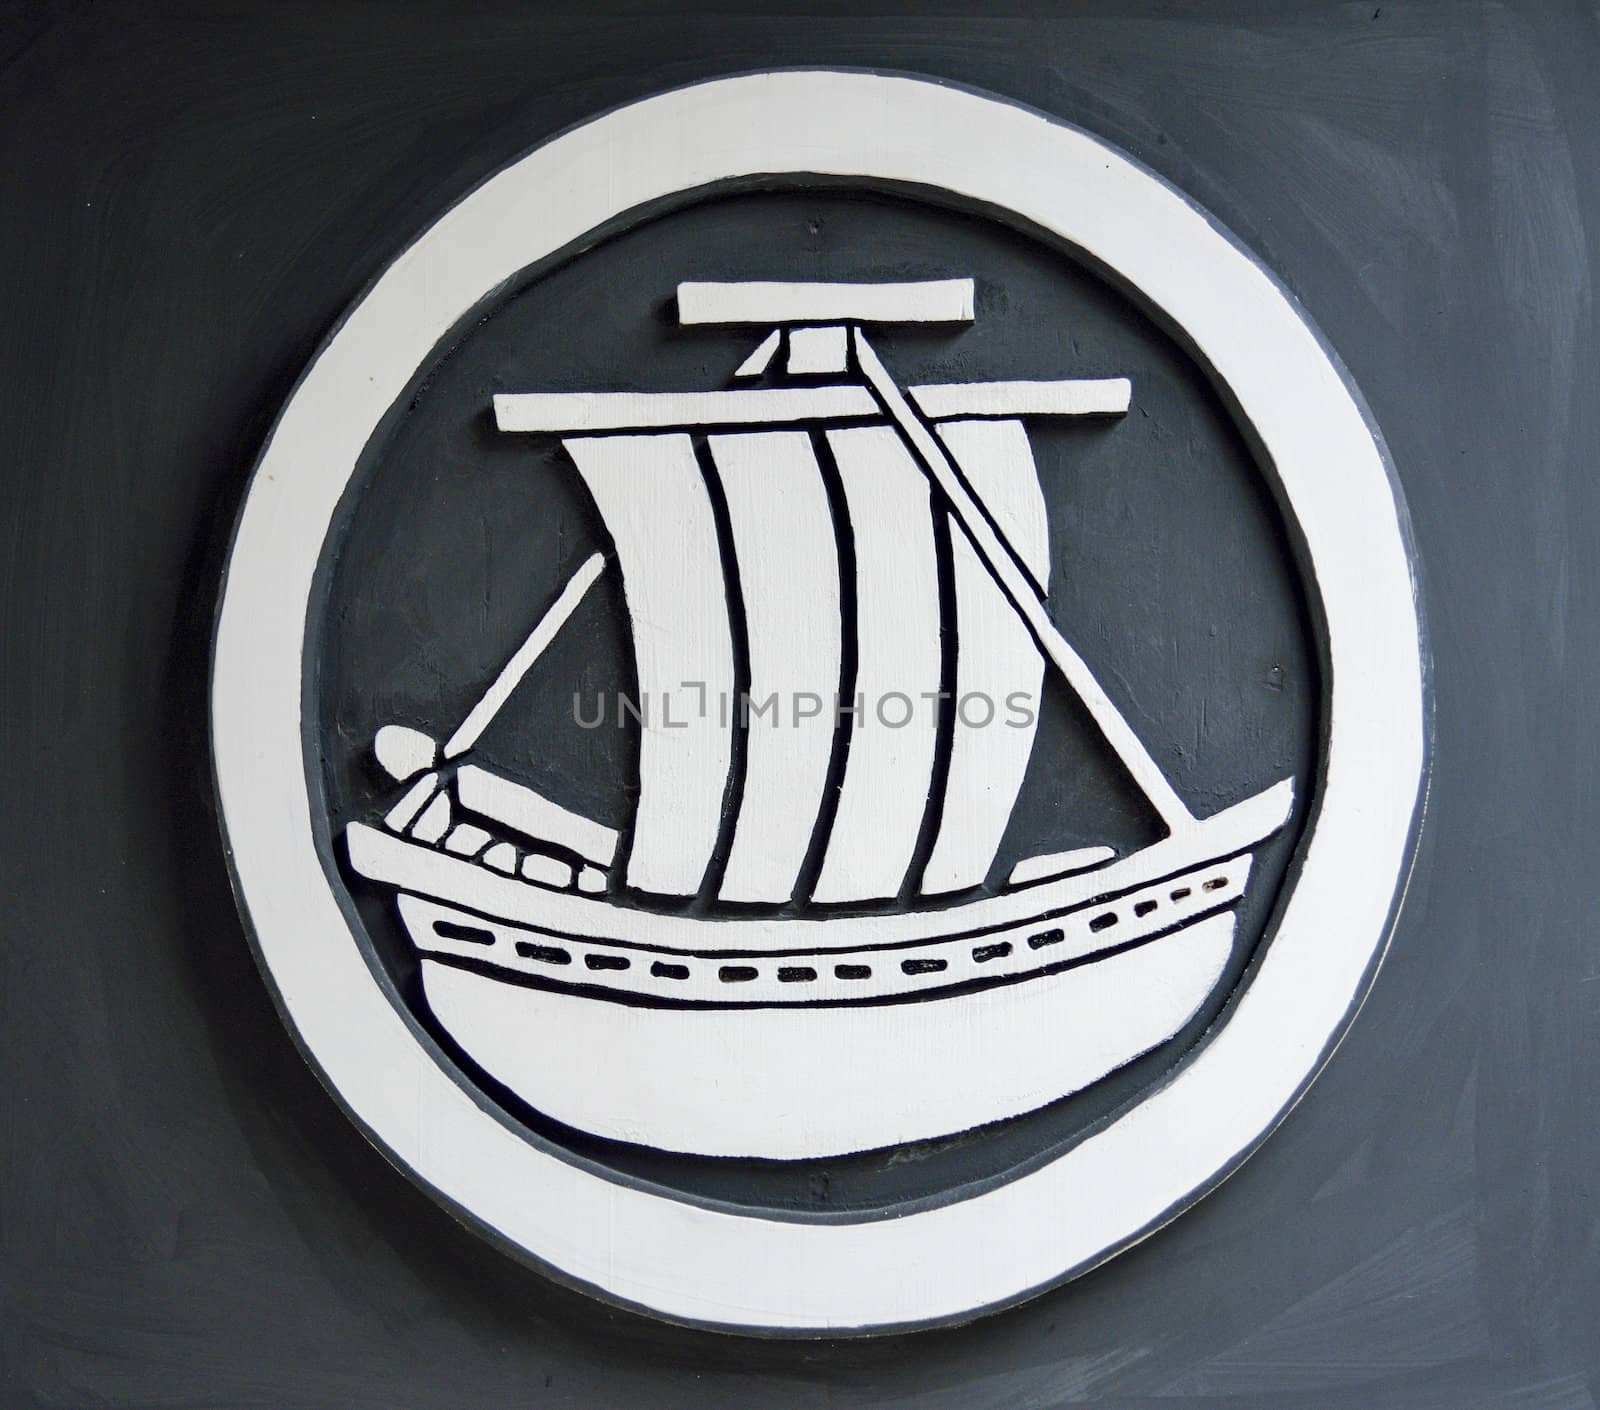 Boat symbol on the wall